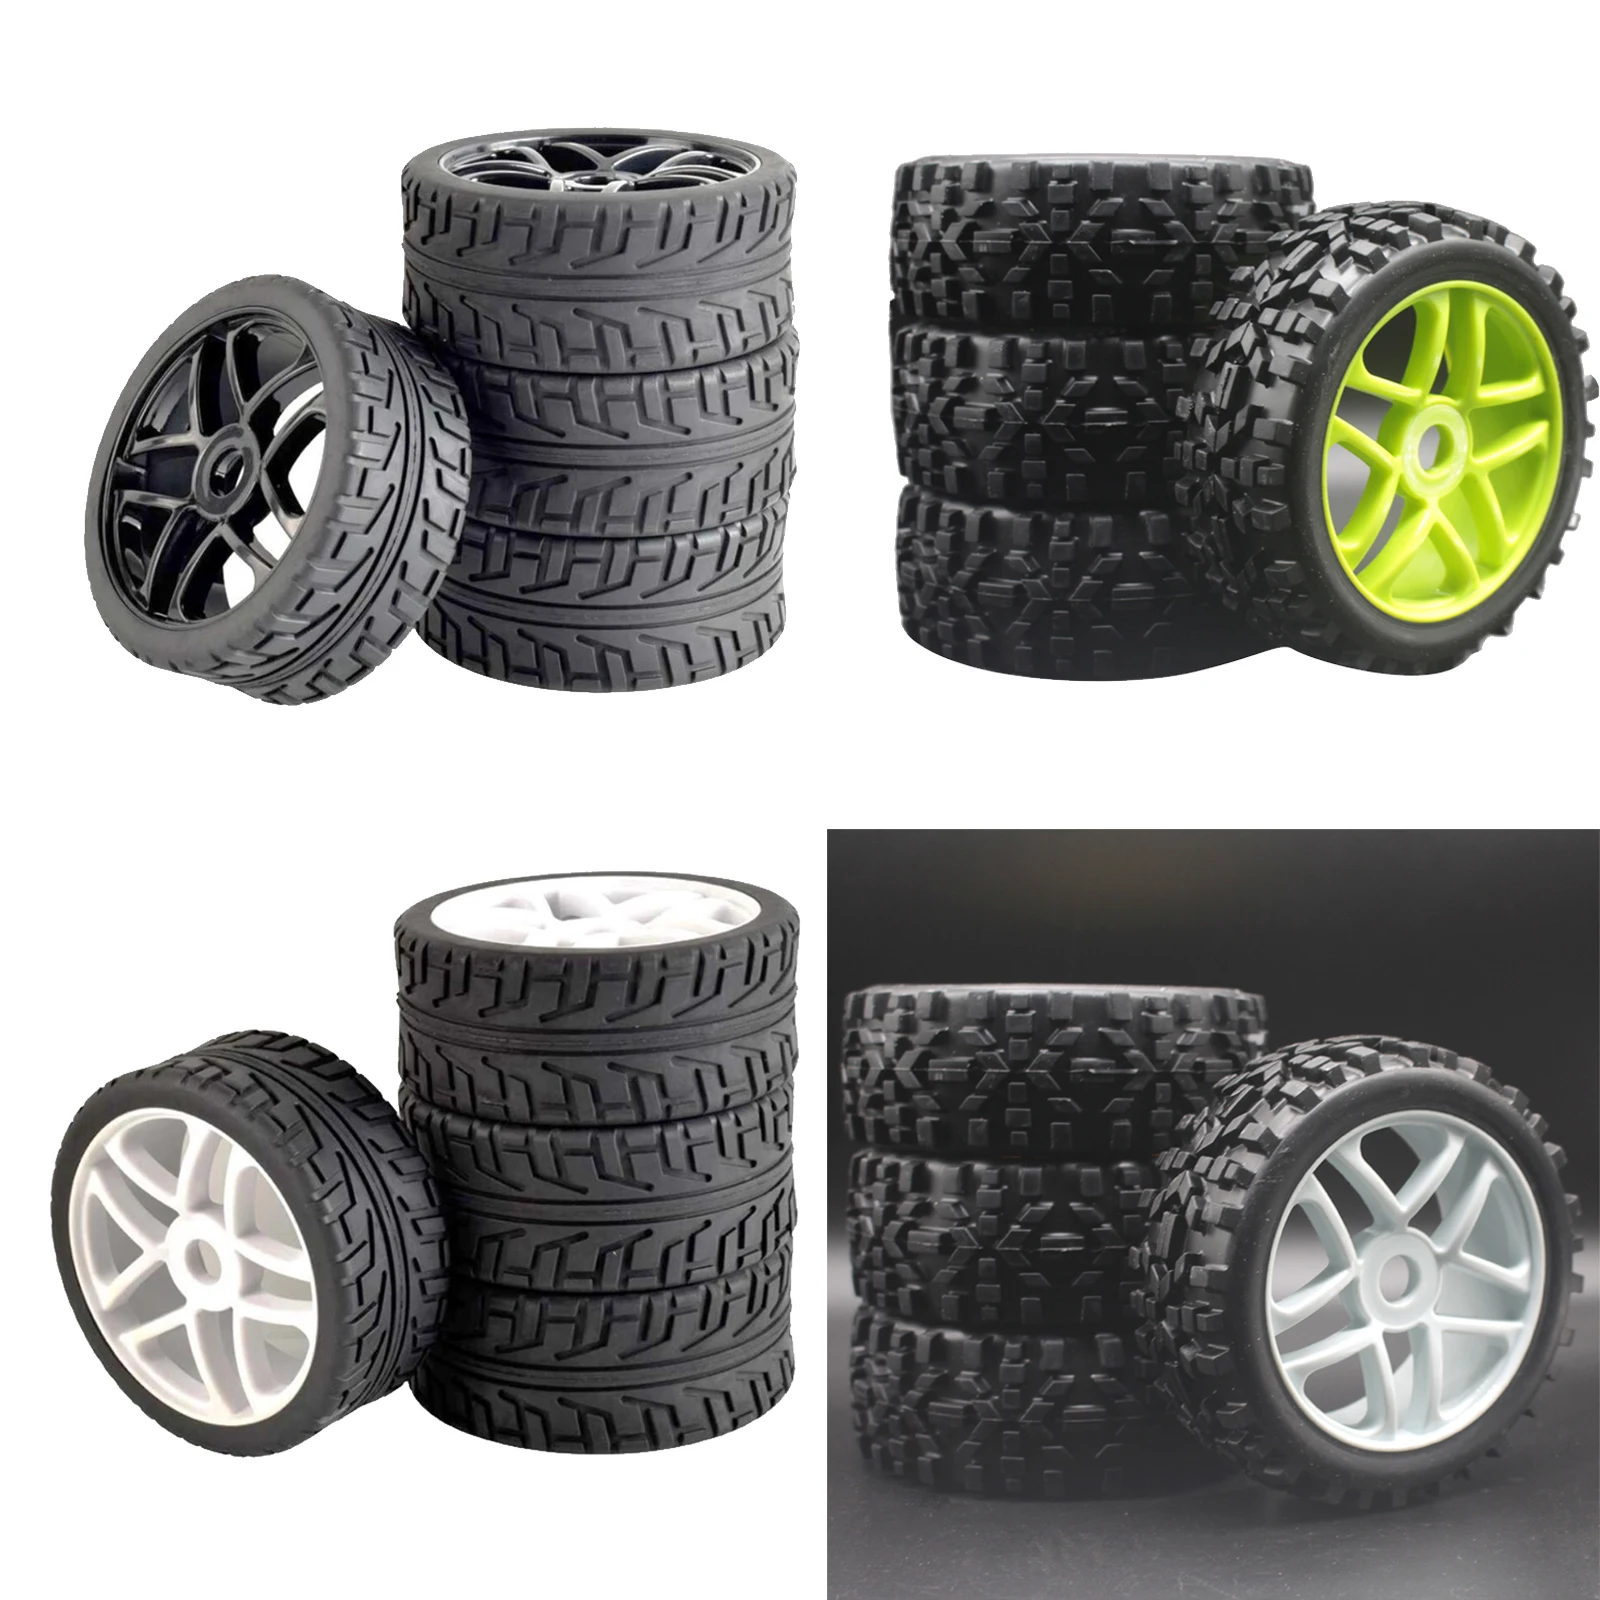 4x 1:8 RC Short Course Rubber Tire for HSP HoBao Model DIY Accessories